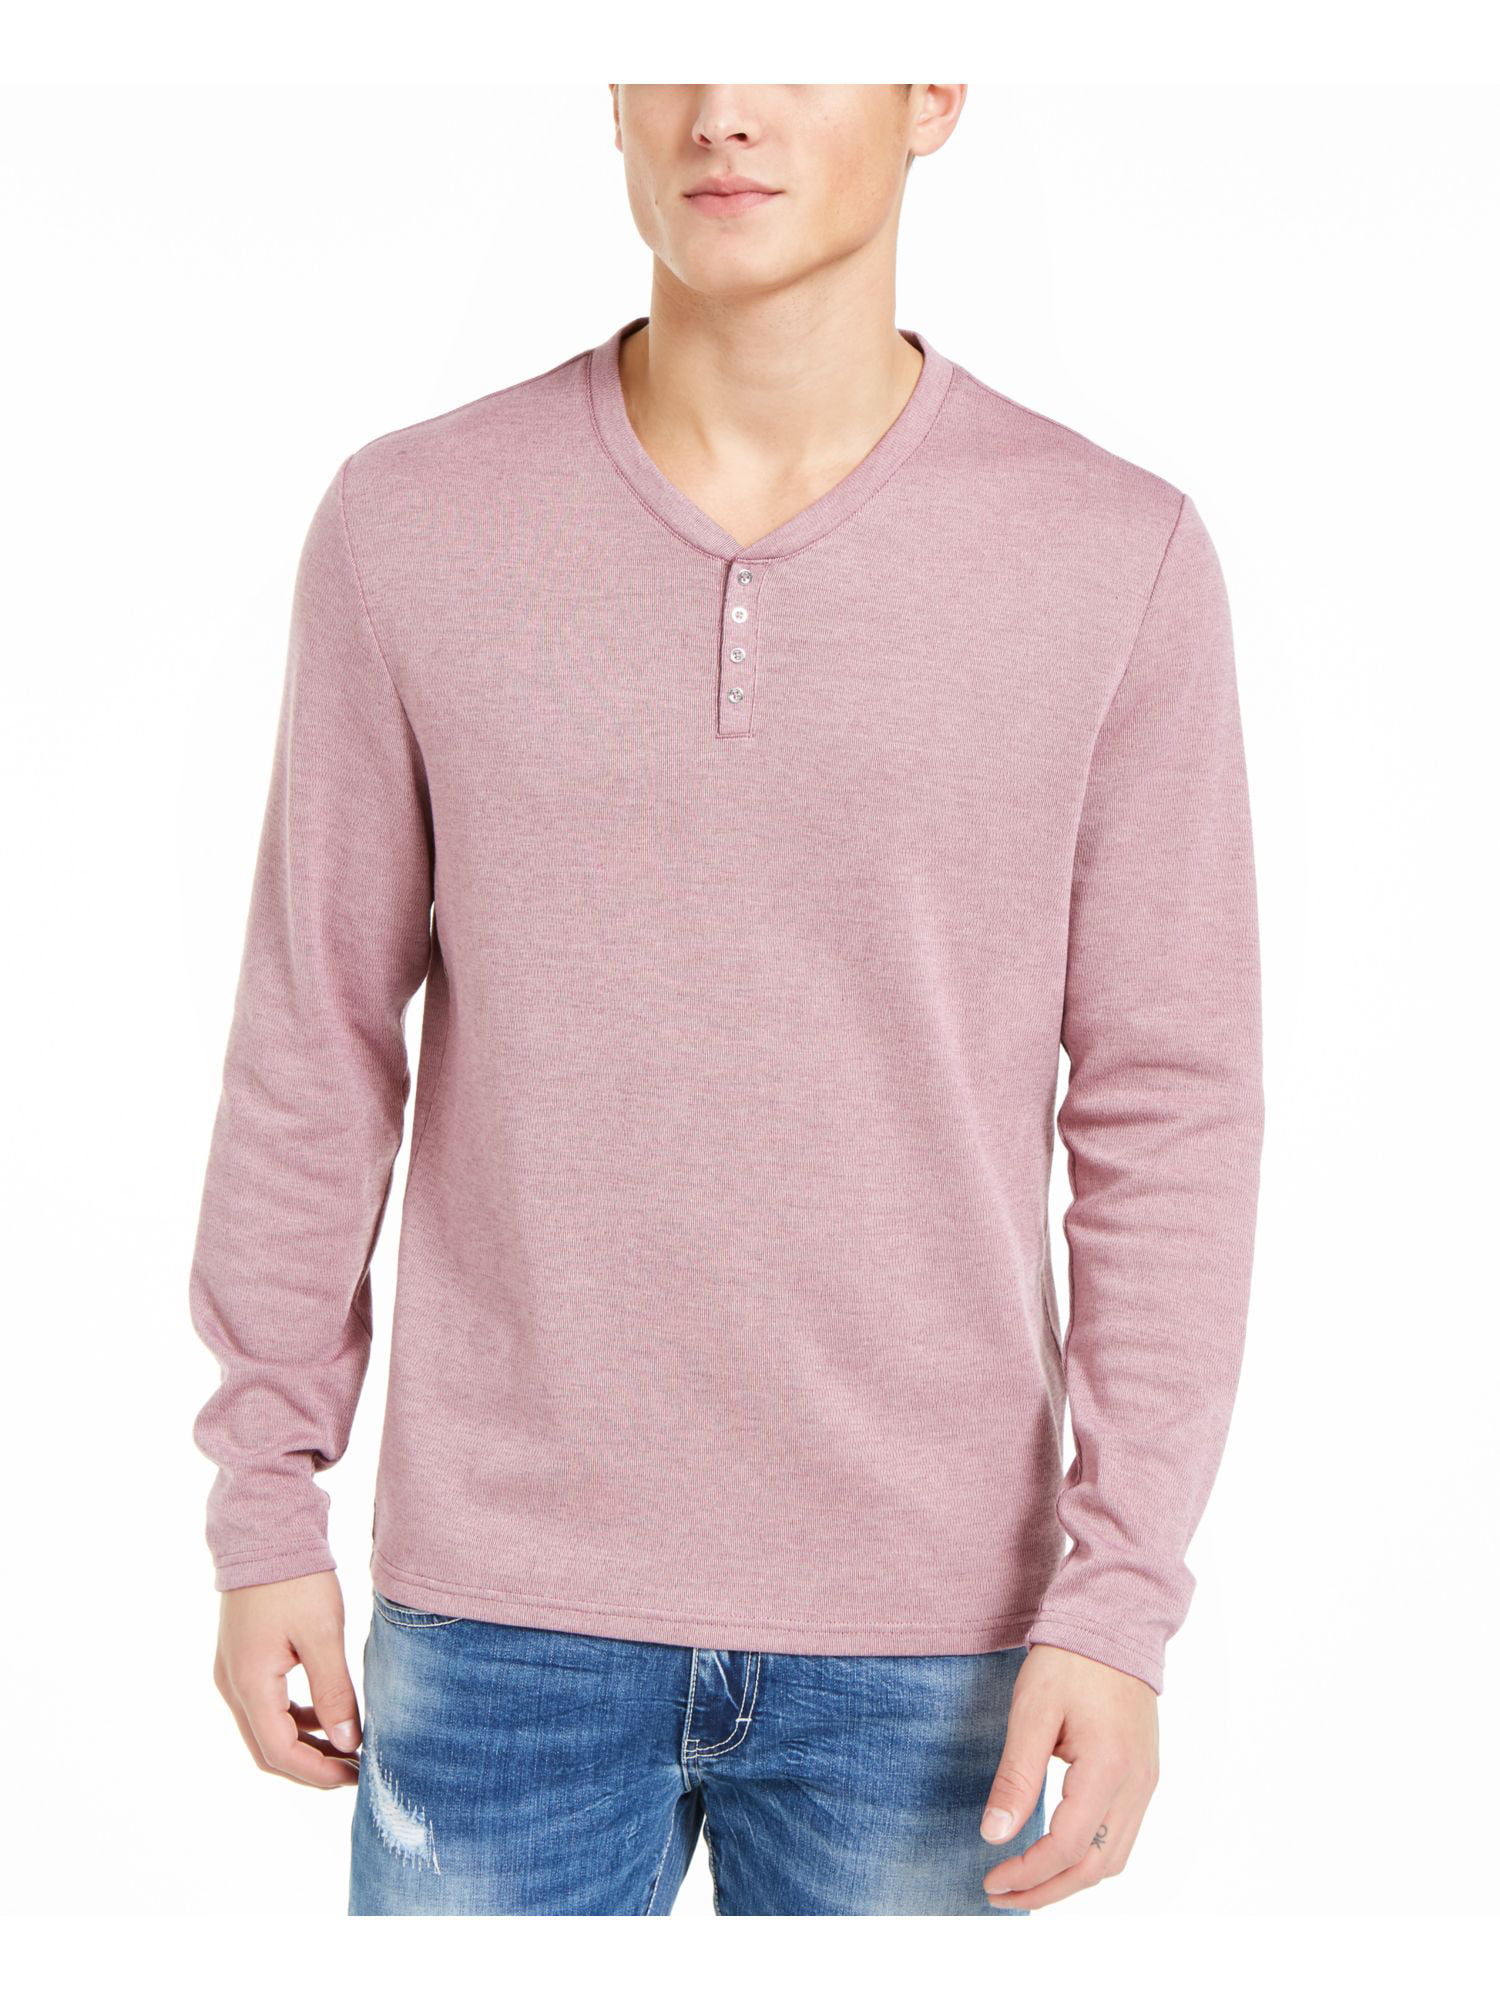 I-N-C Mens Ls Knit Pullover Sweater 